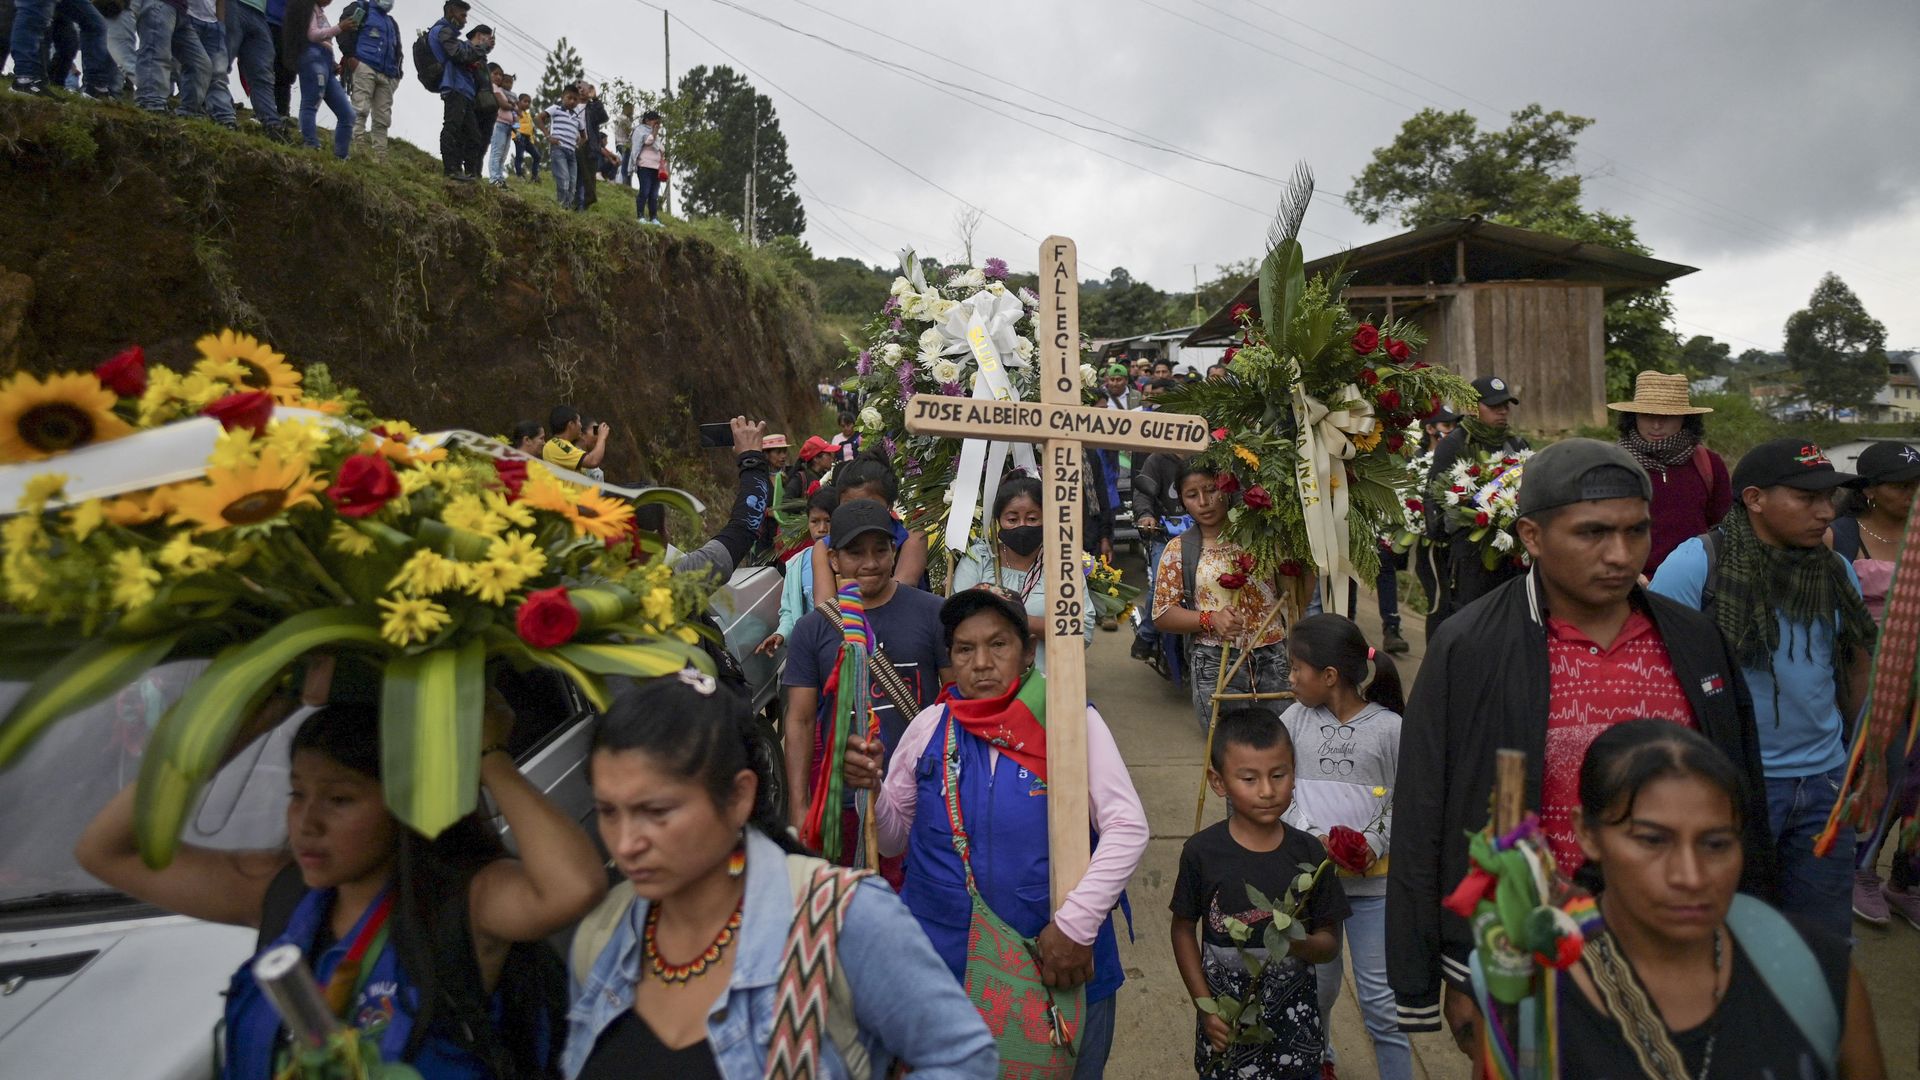 A funeral procession in Colombia in which one woman is carrying a wooden cross, several others are carrying flowers and a child is carrying a red rose